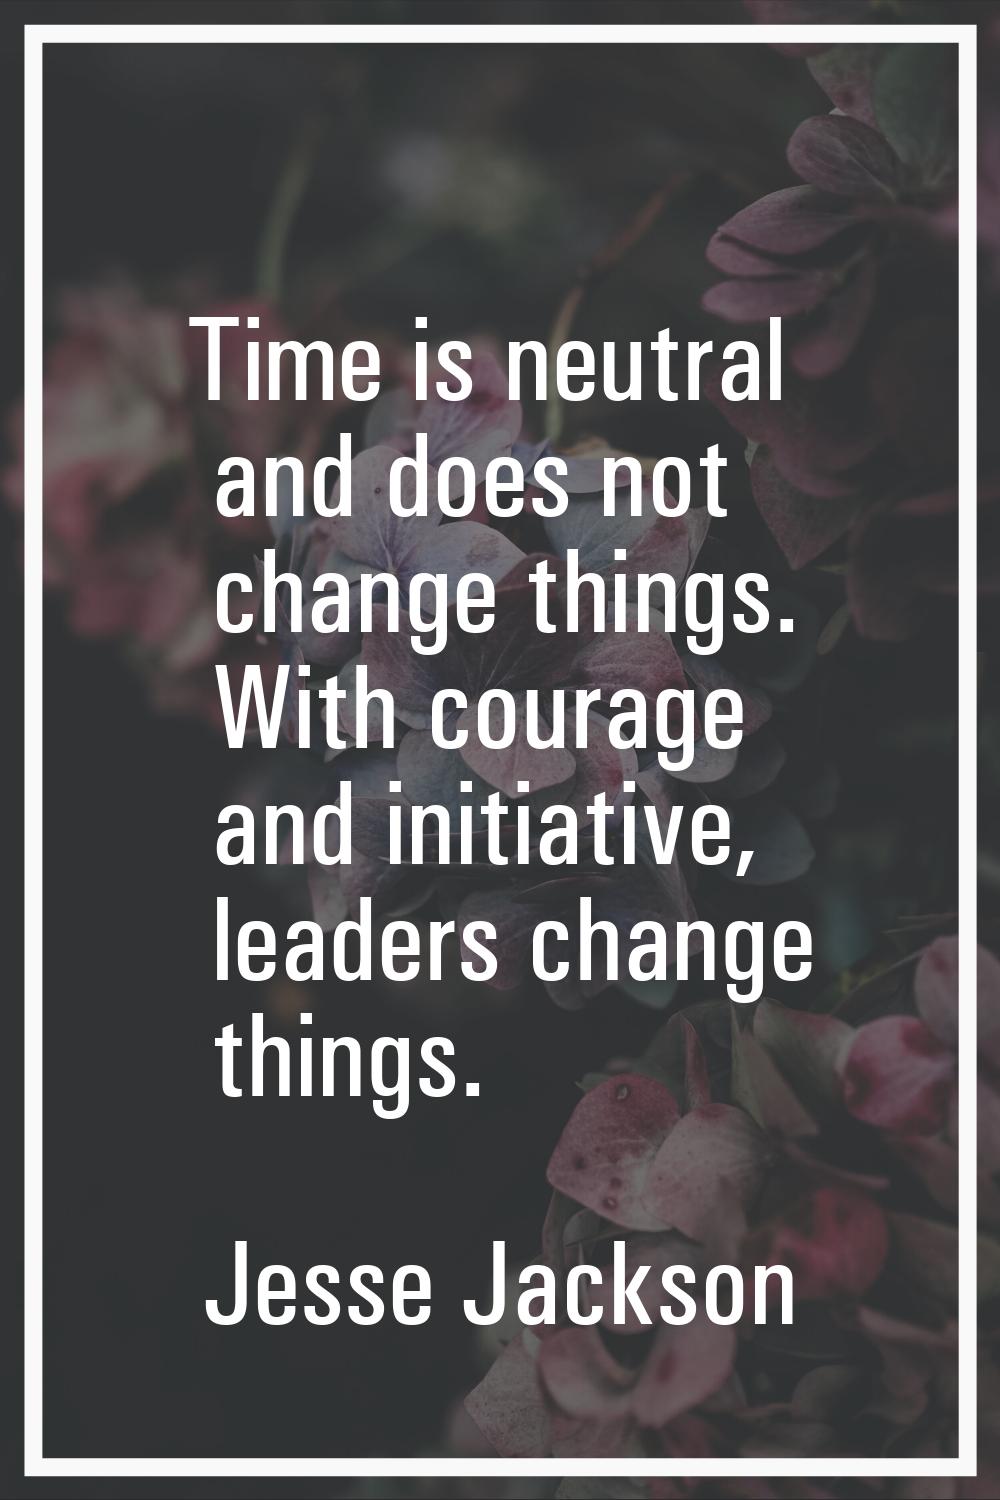 Time is neutral and does not change things. With courage and initiative, leaders change things.